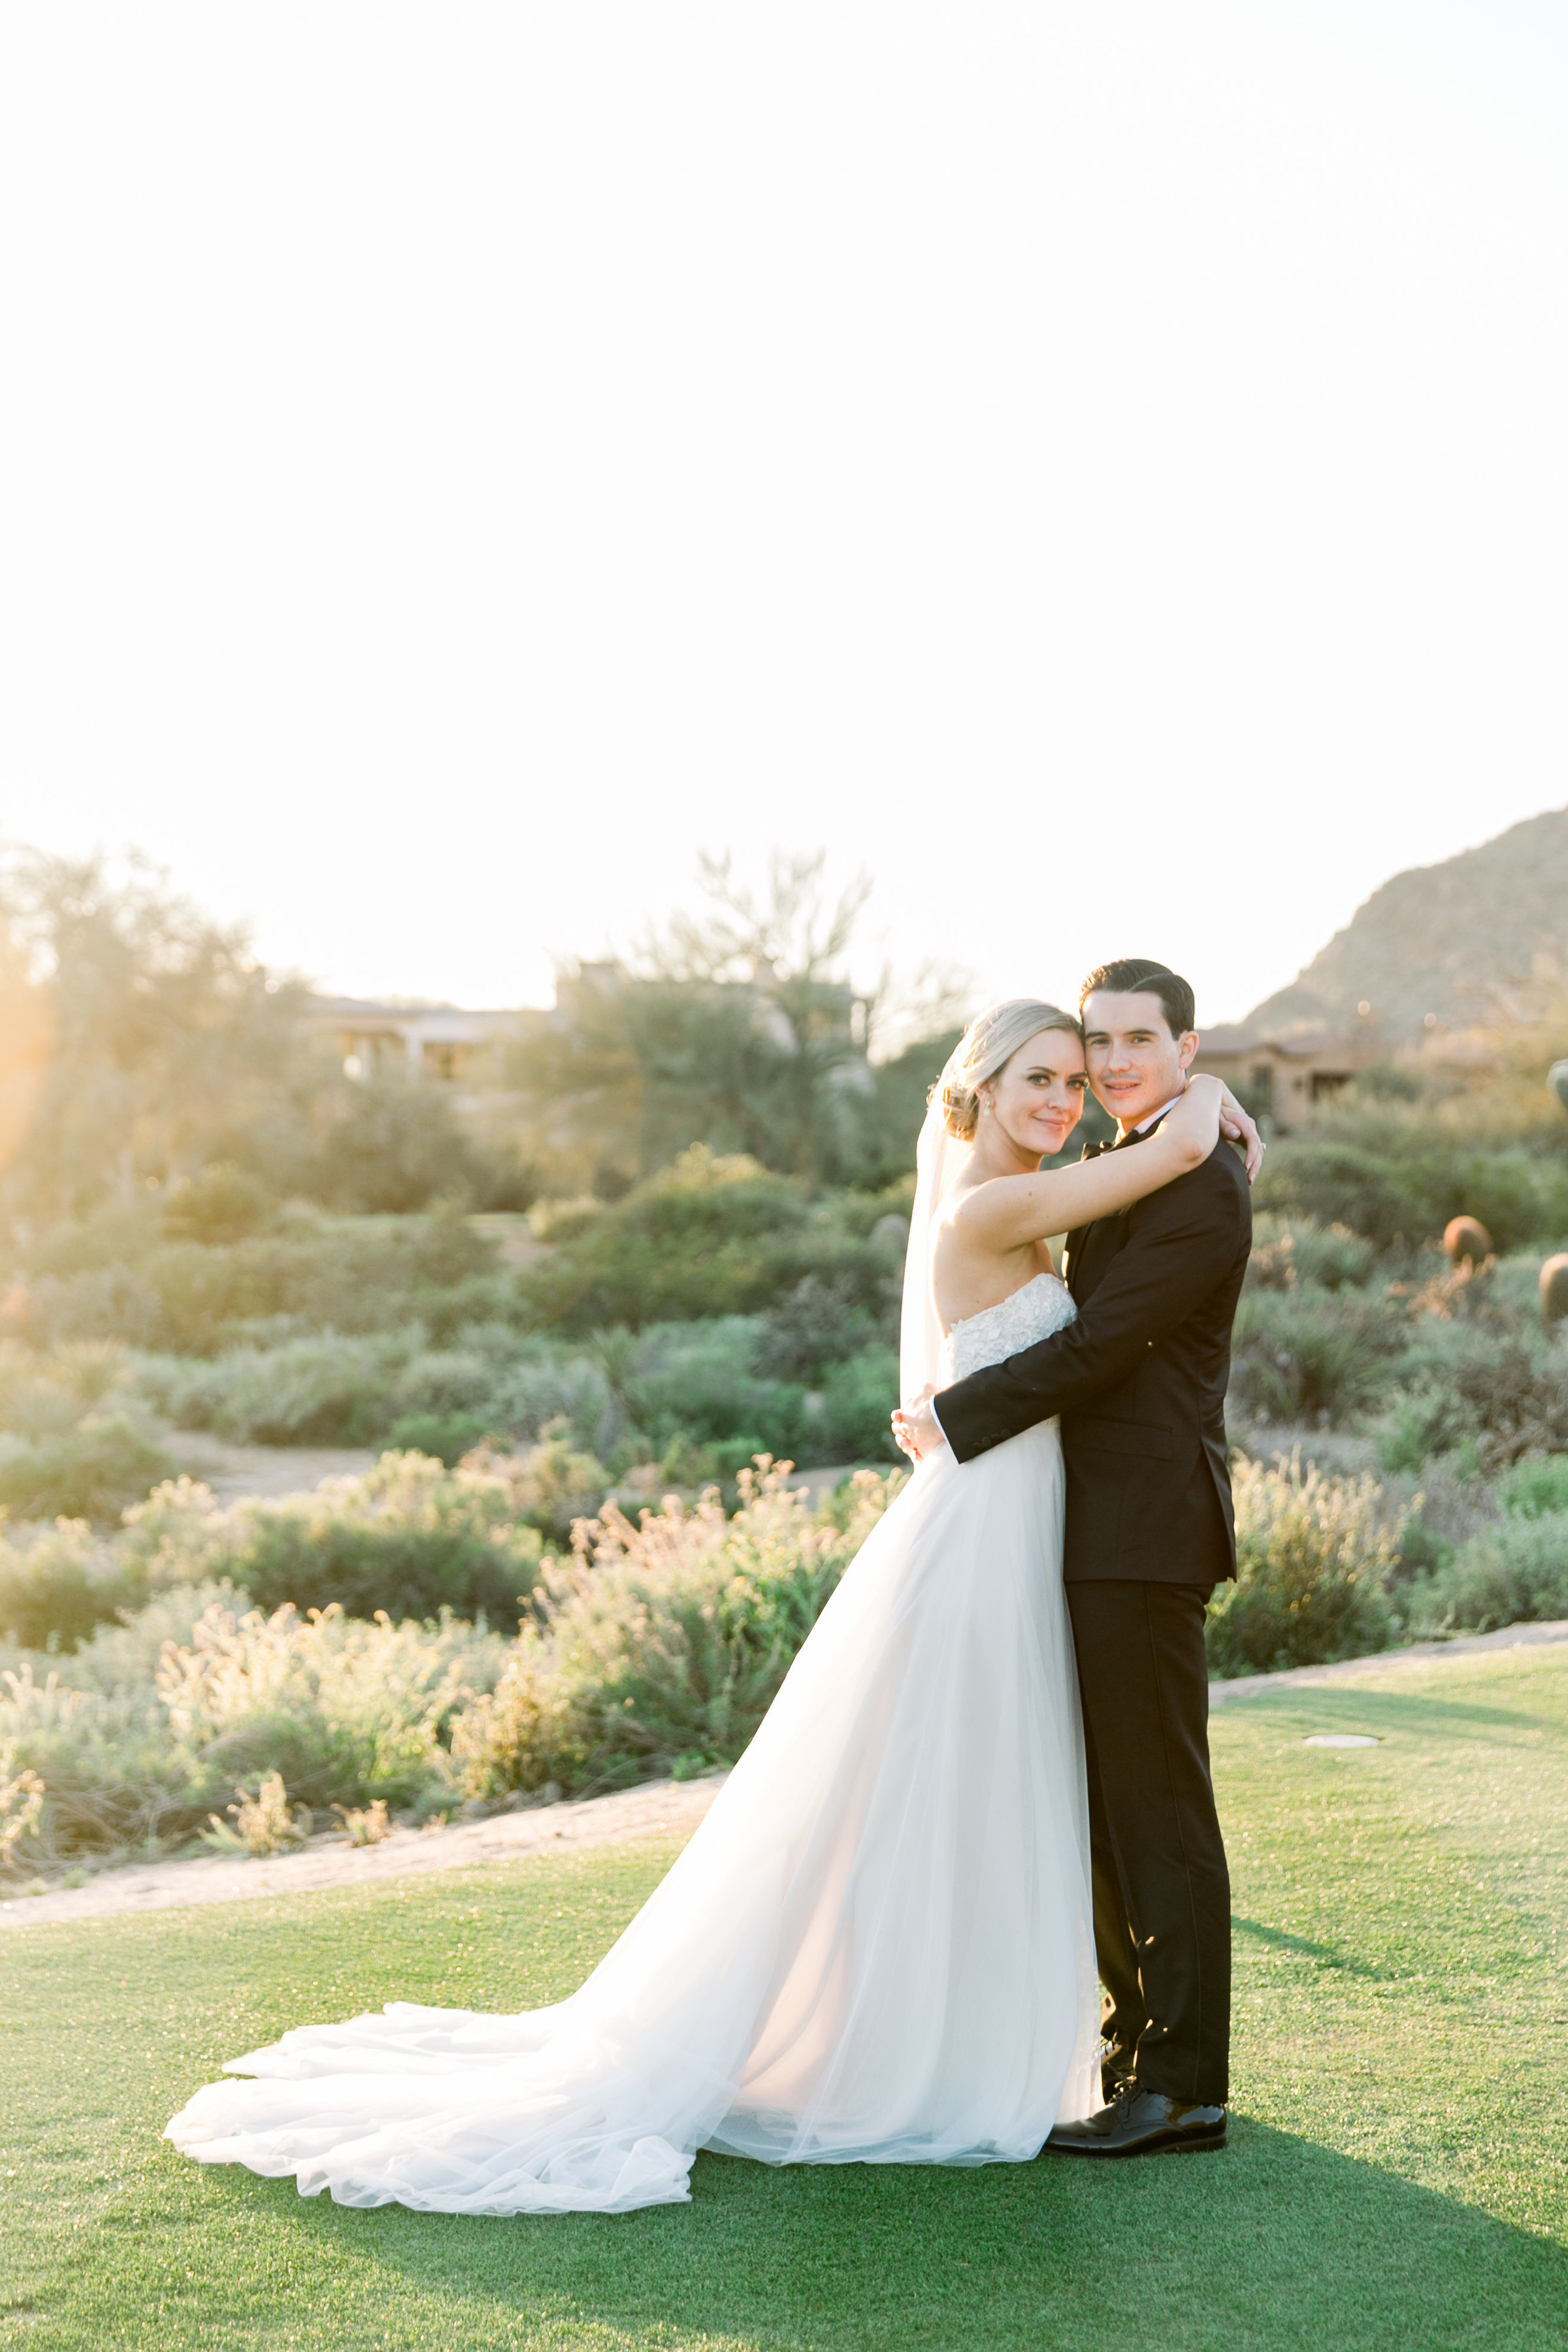 Karlie Colleen Photography - Arizona Wedding at The Troon Scottsdale Country Club - Paige & Shane -655